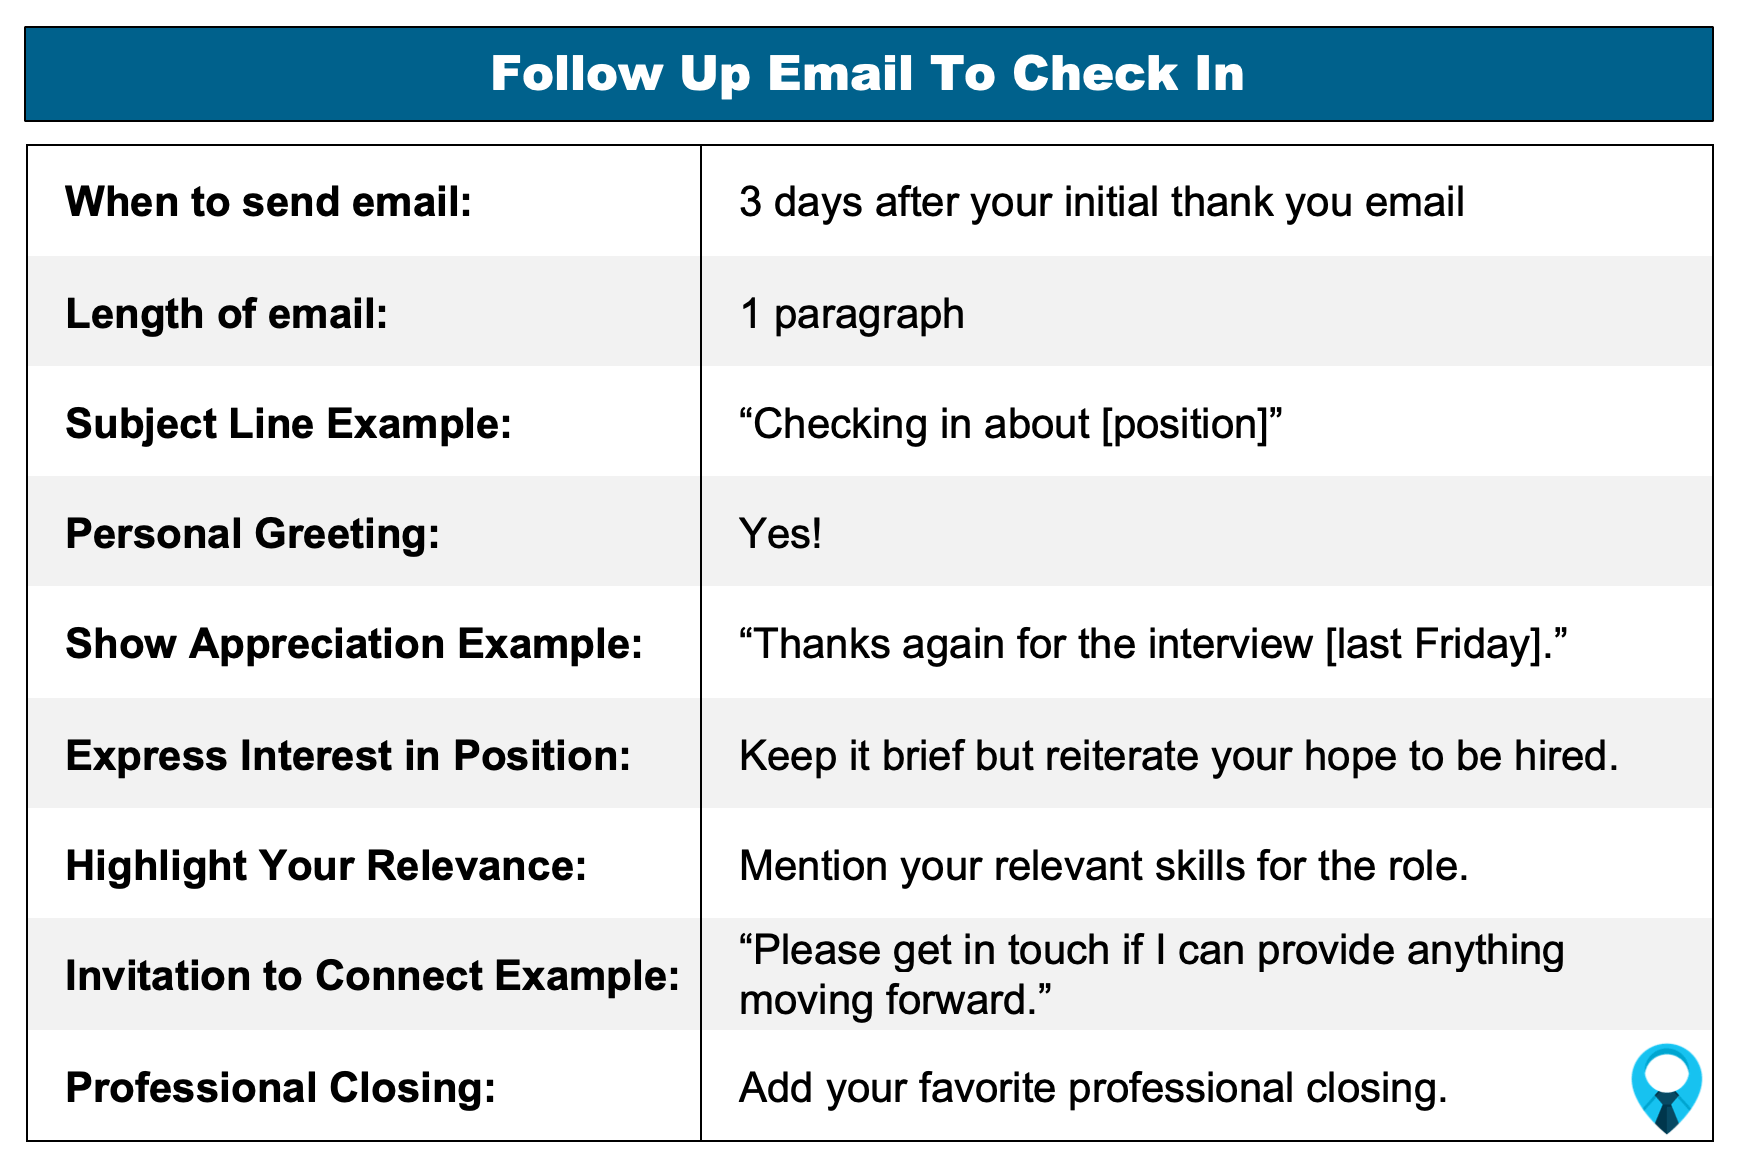 Follow-Up Email To Check In